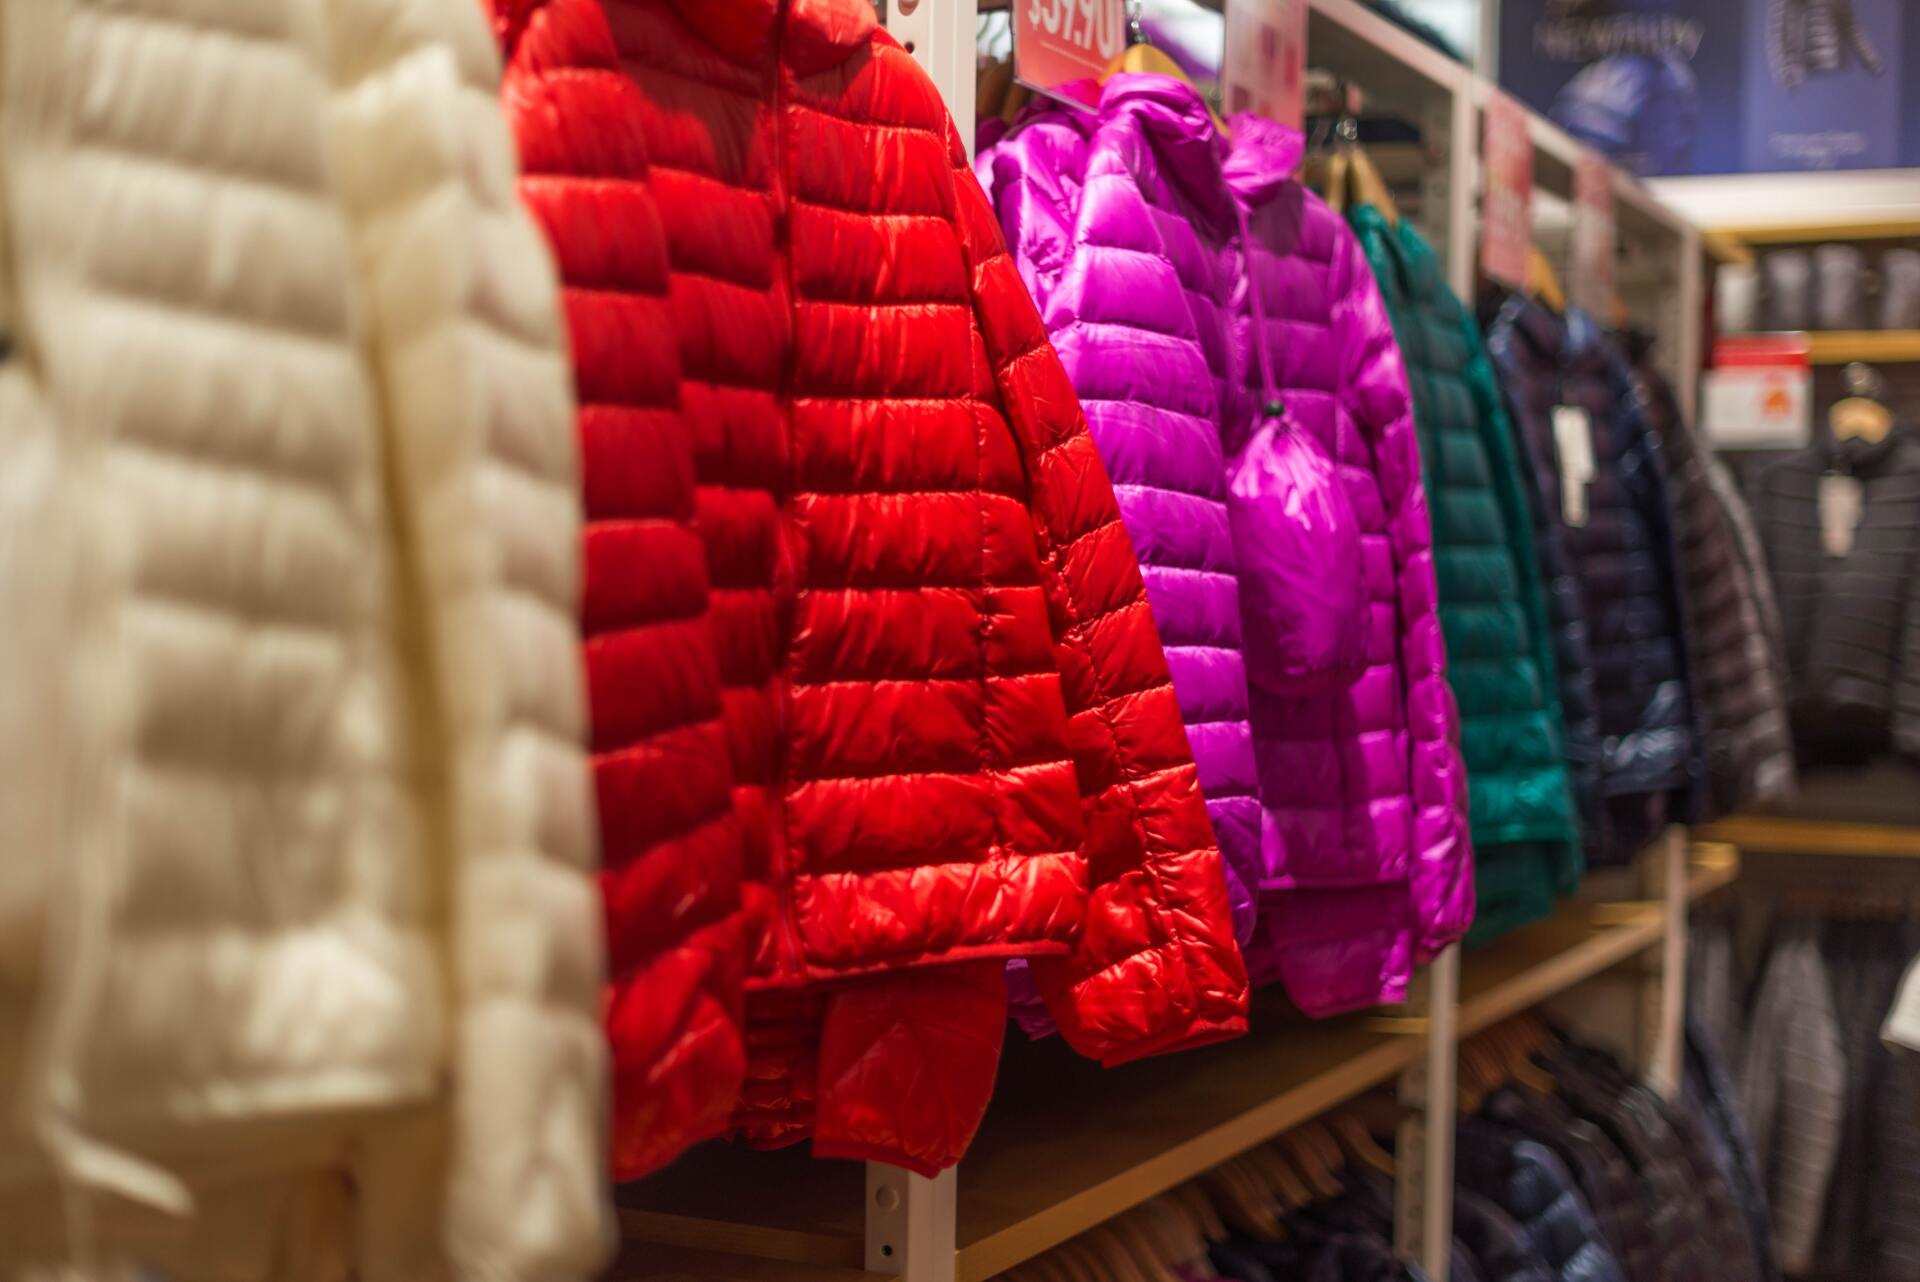 Racks of winter jackets in a clothing store